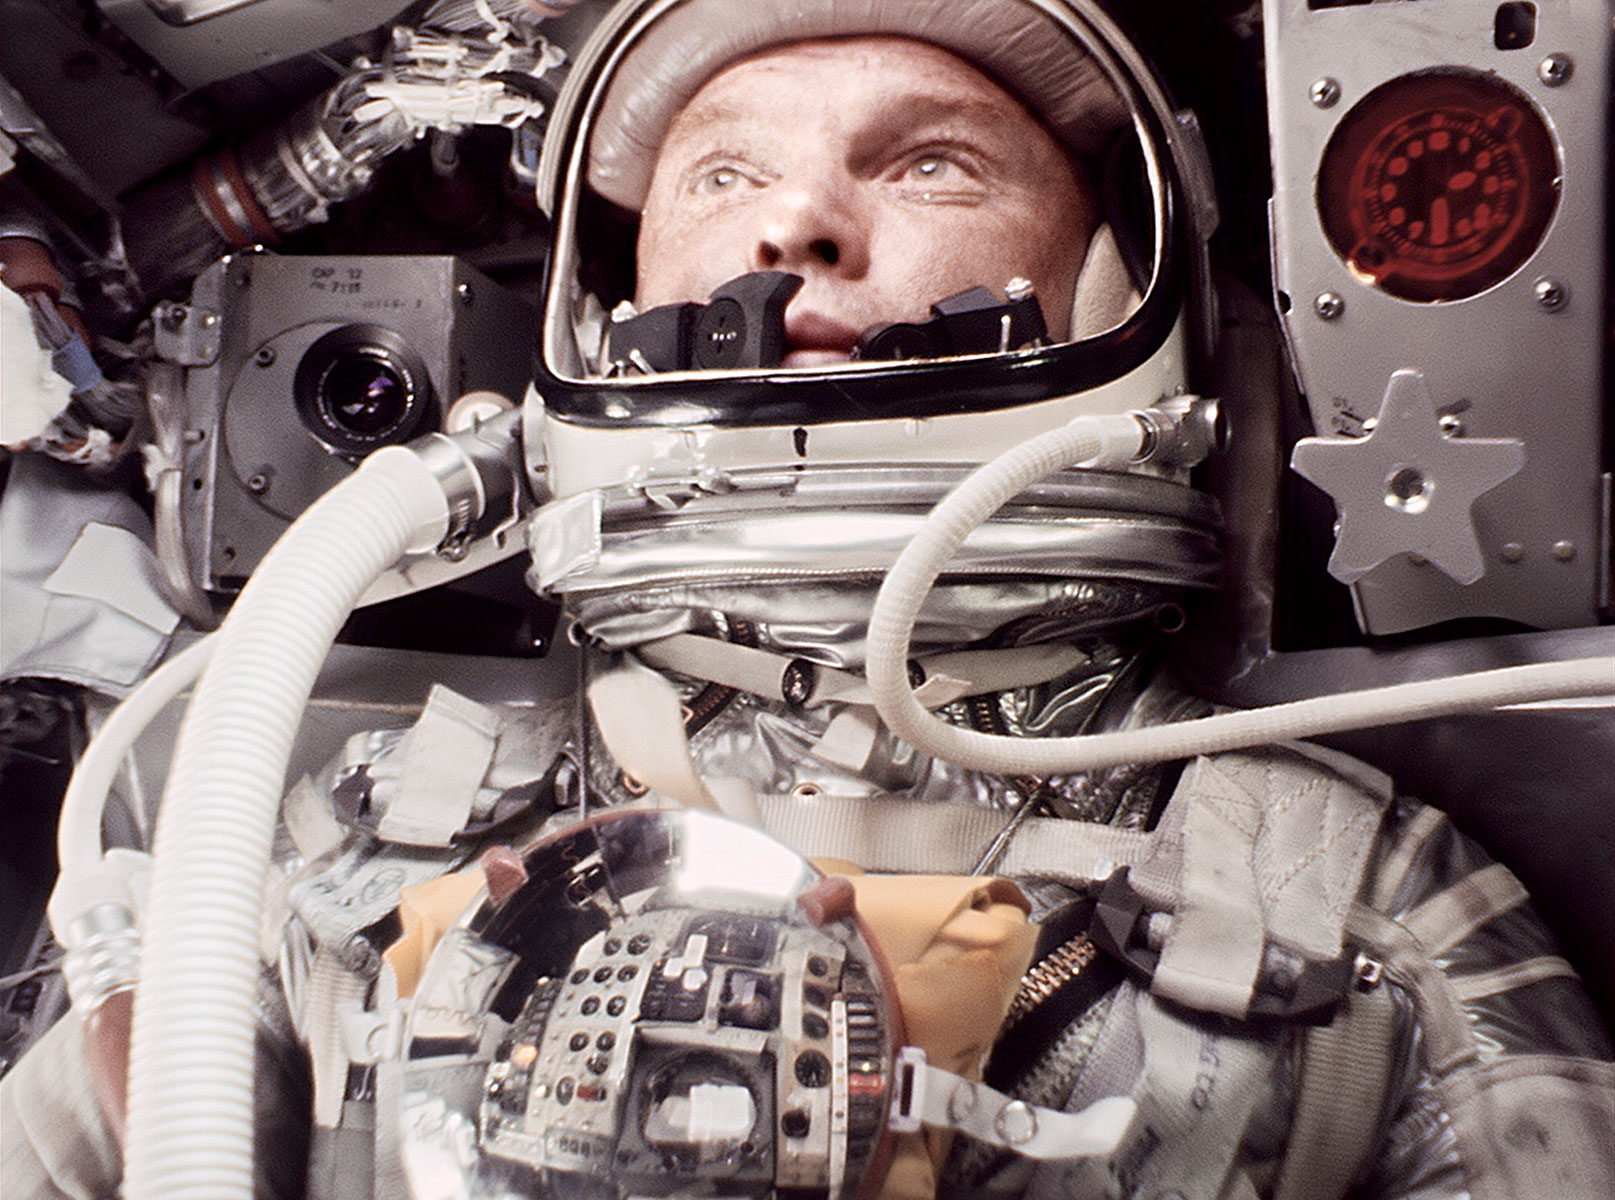 John Glenn in Earth's orbit, as never seen before. The newly remastered image for the 60th anniversary uses more than 1,000 image samples to reveal details on Glenn's spacesuit and reflections in his chest-mounted mirror.